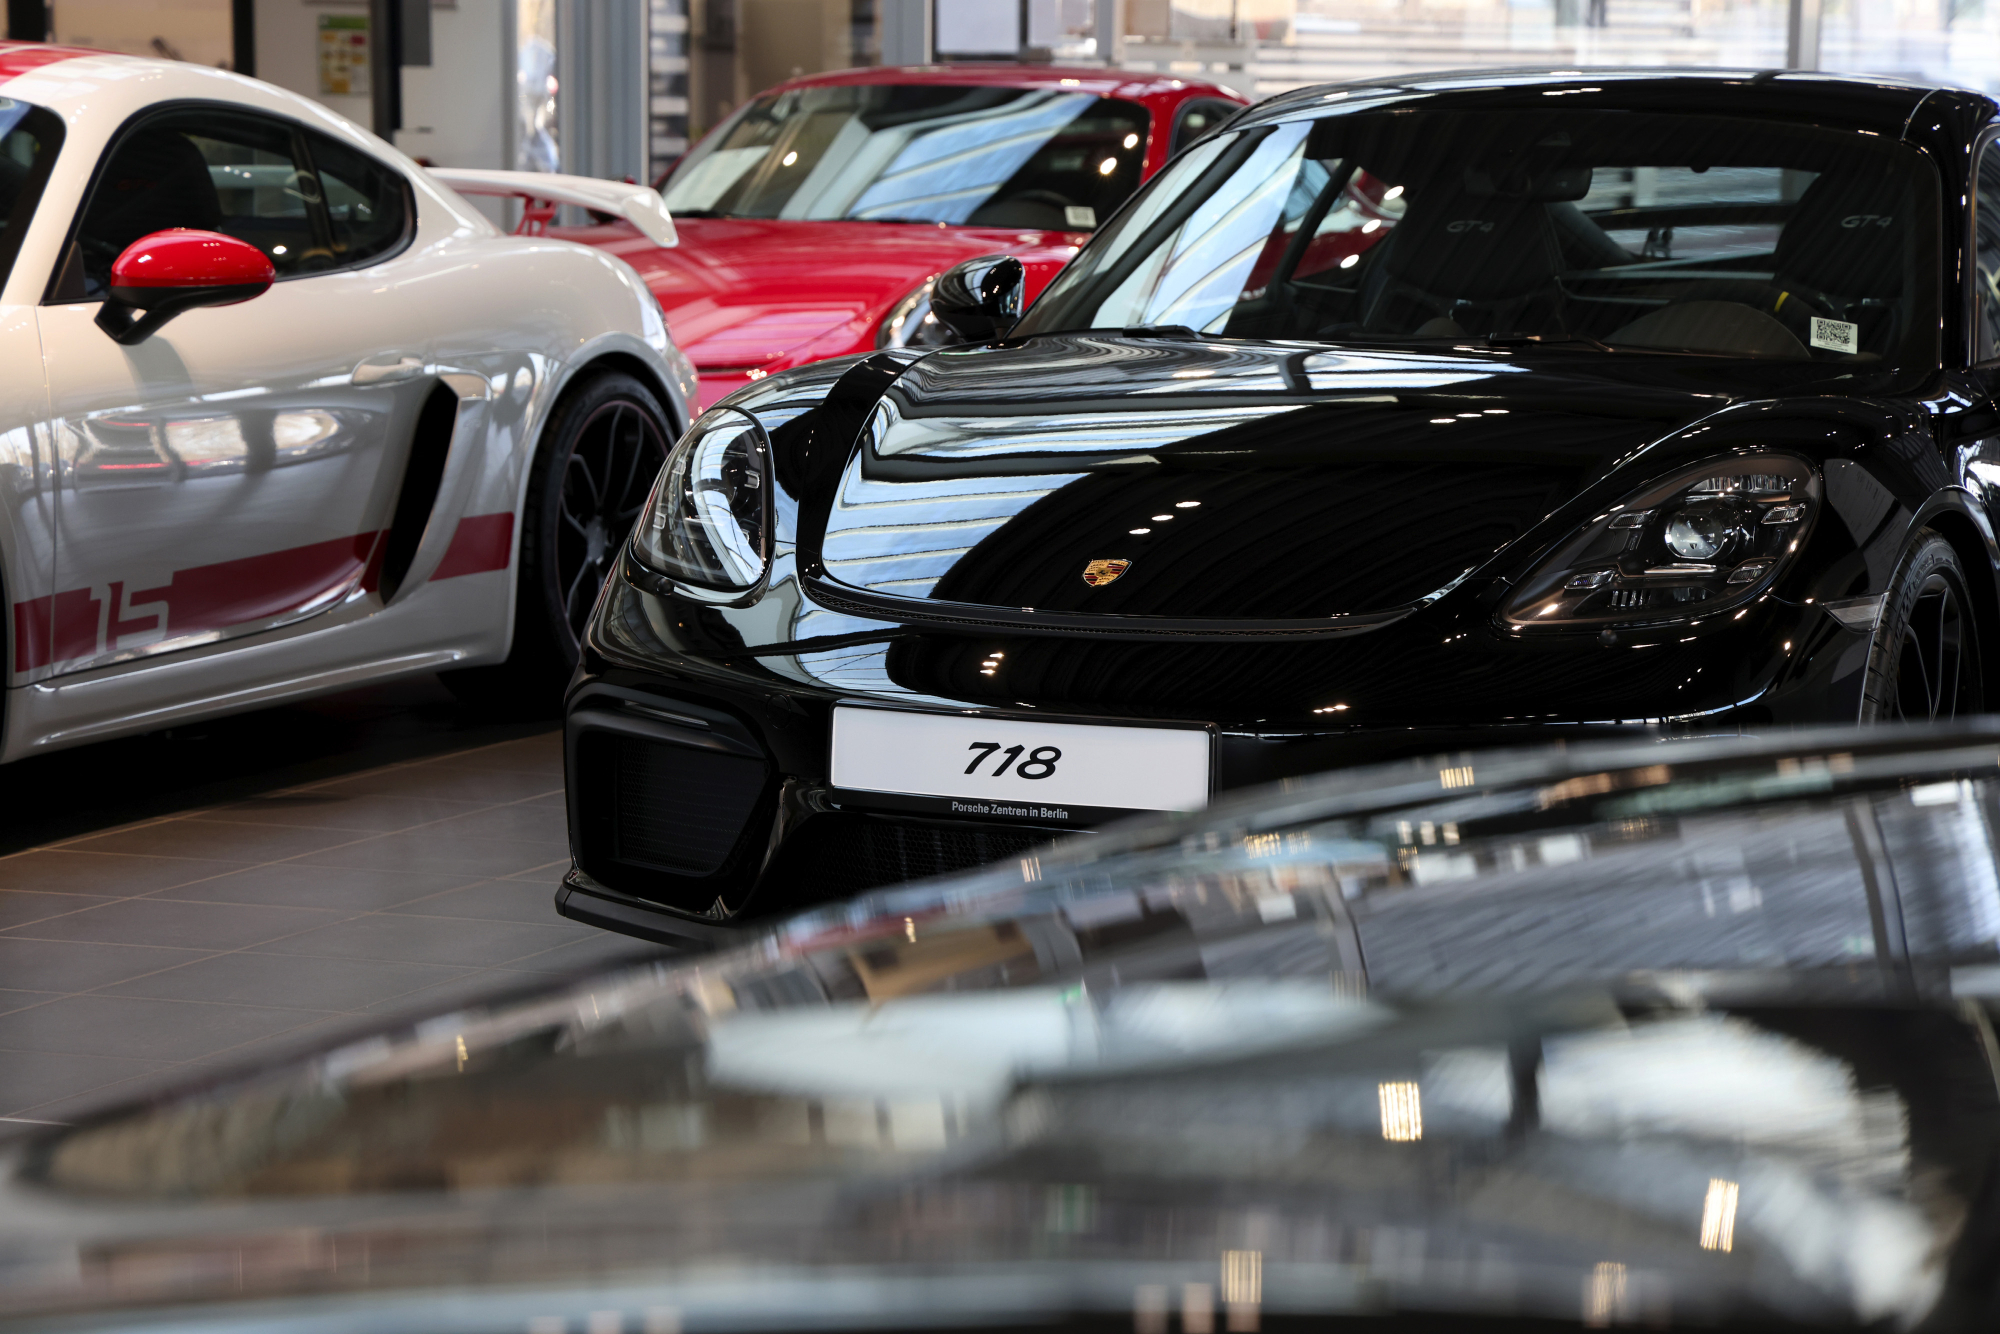 The 718 Cayman GT4 in the showroom, but is it the fastest Porsche?